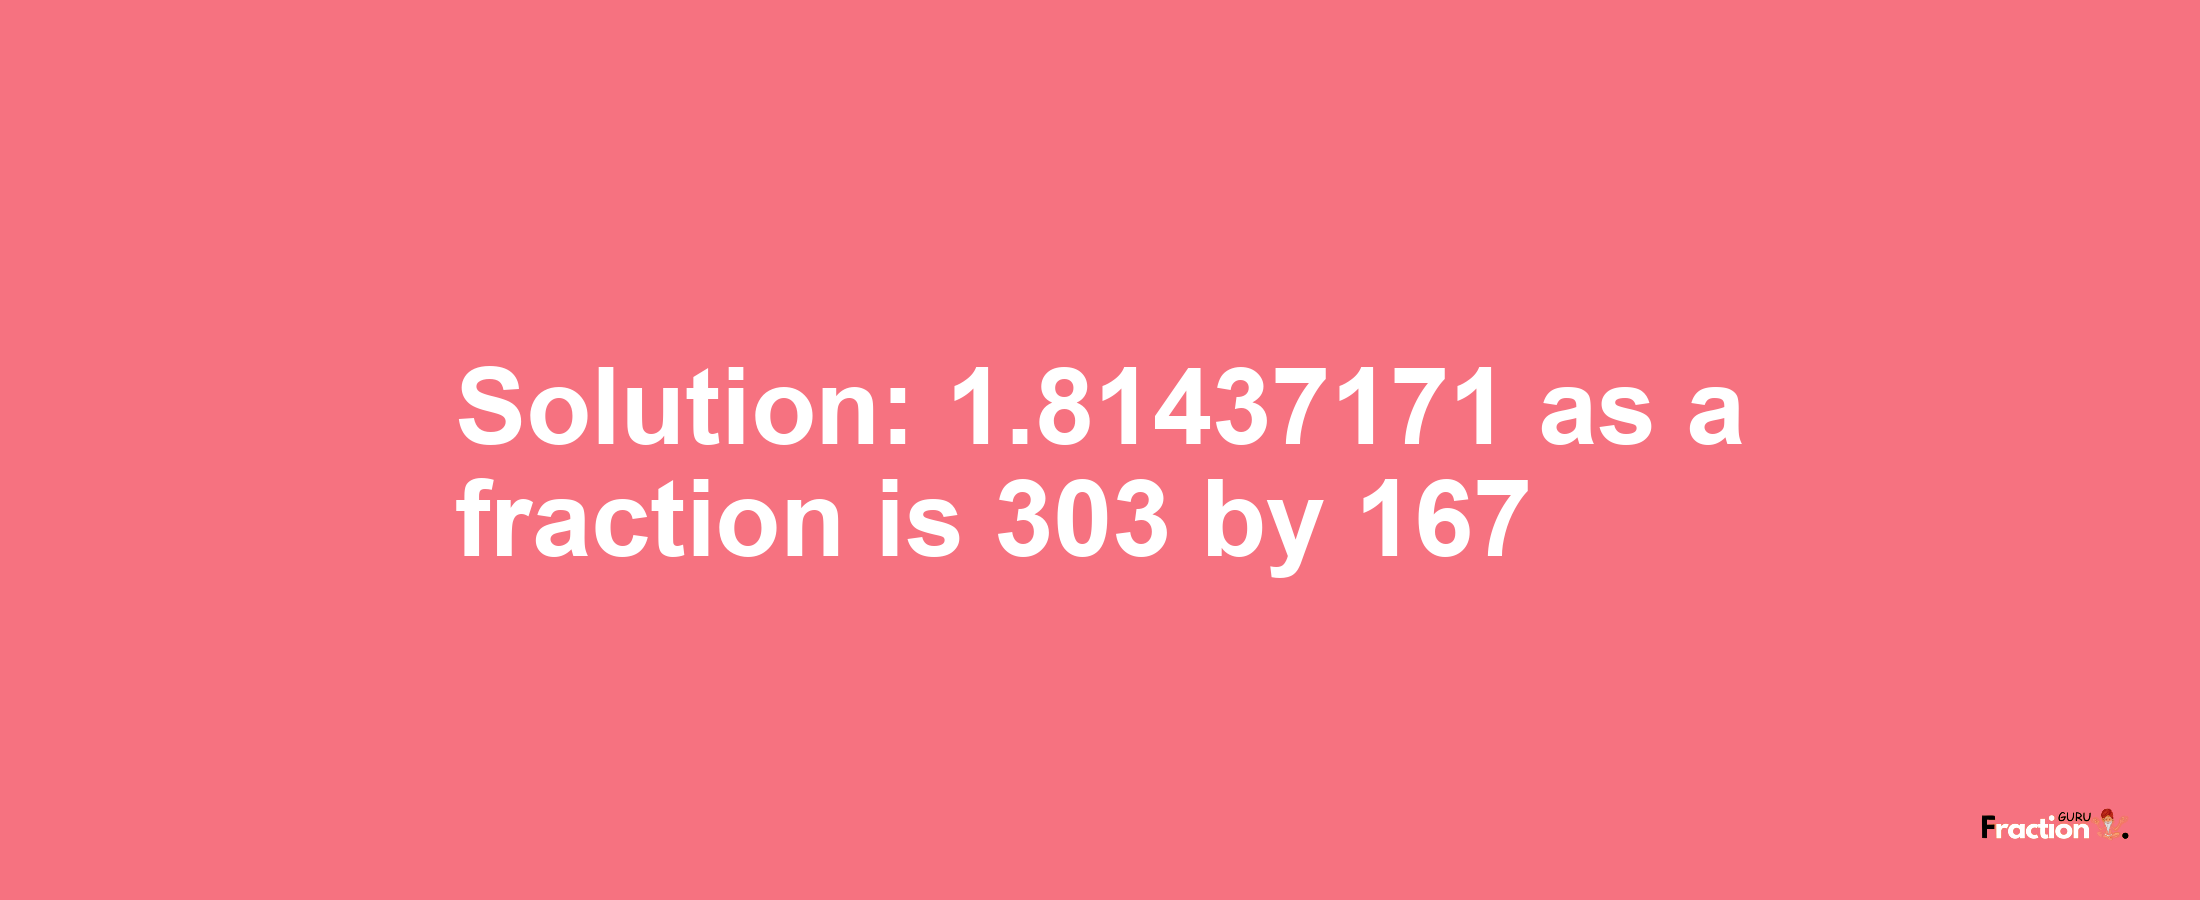 Solution:1.81437171 as a fraction is 303/167